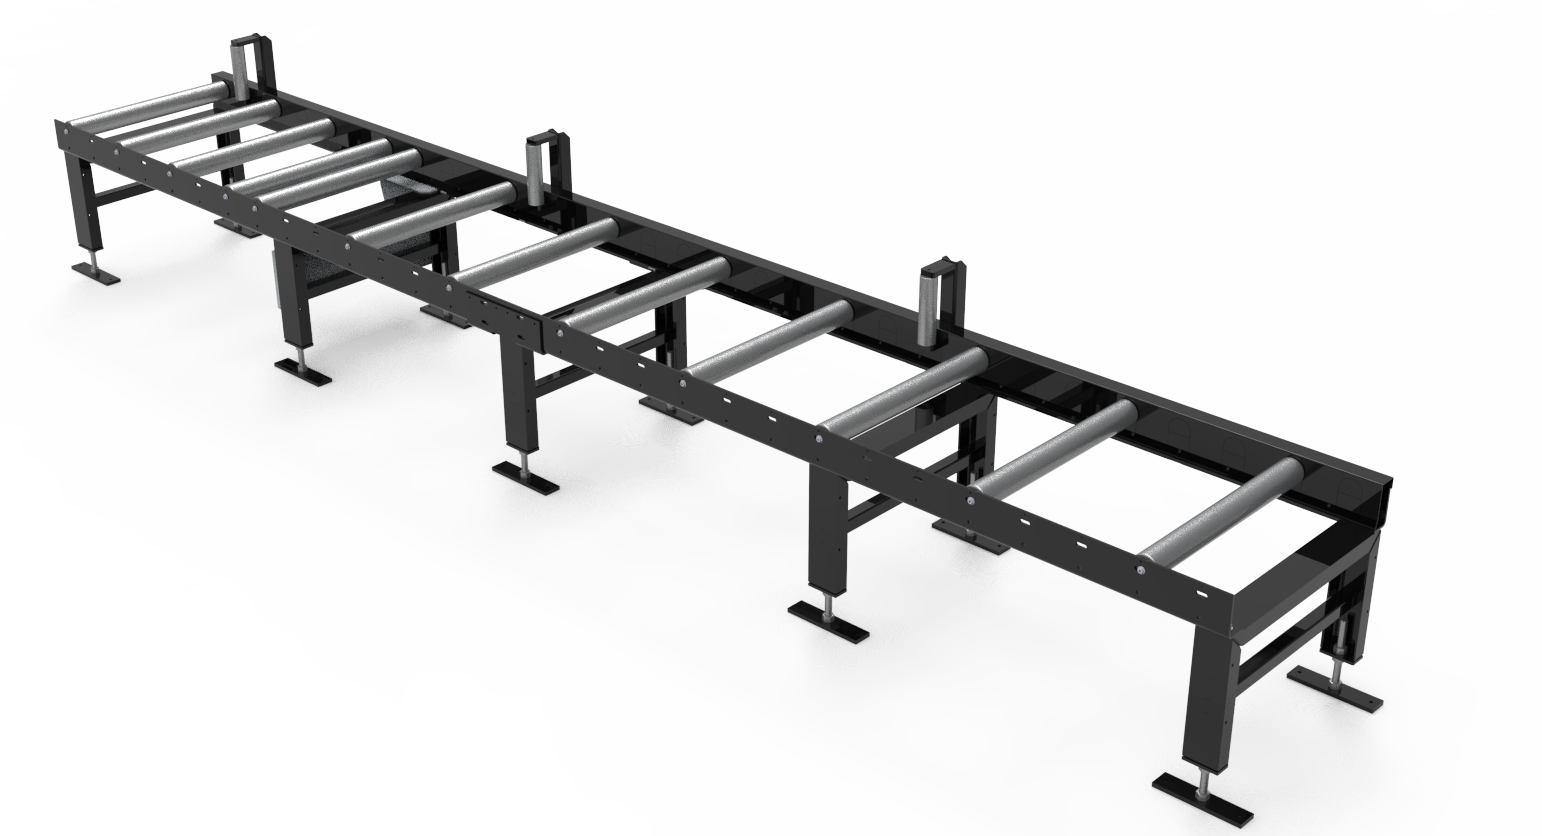 MPS7090HD DRIVEN INFEED CONVEYORS